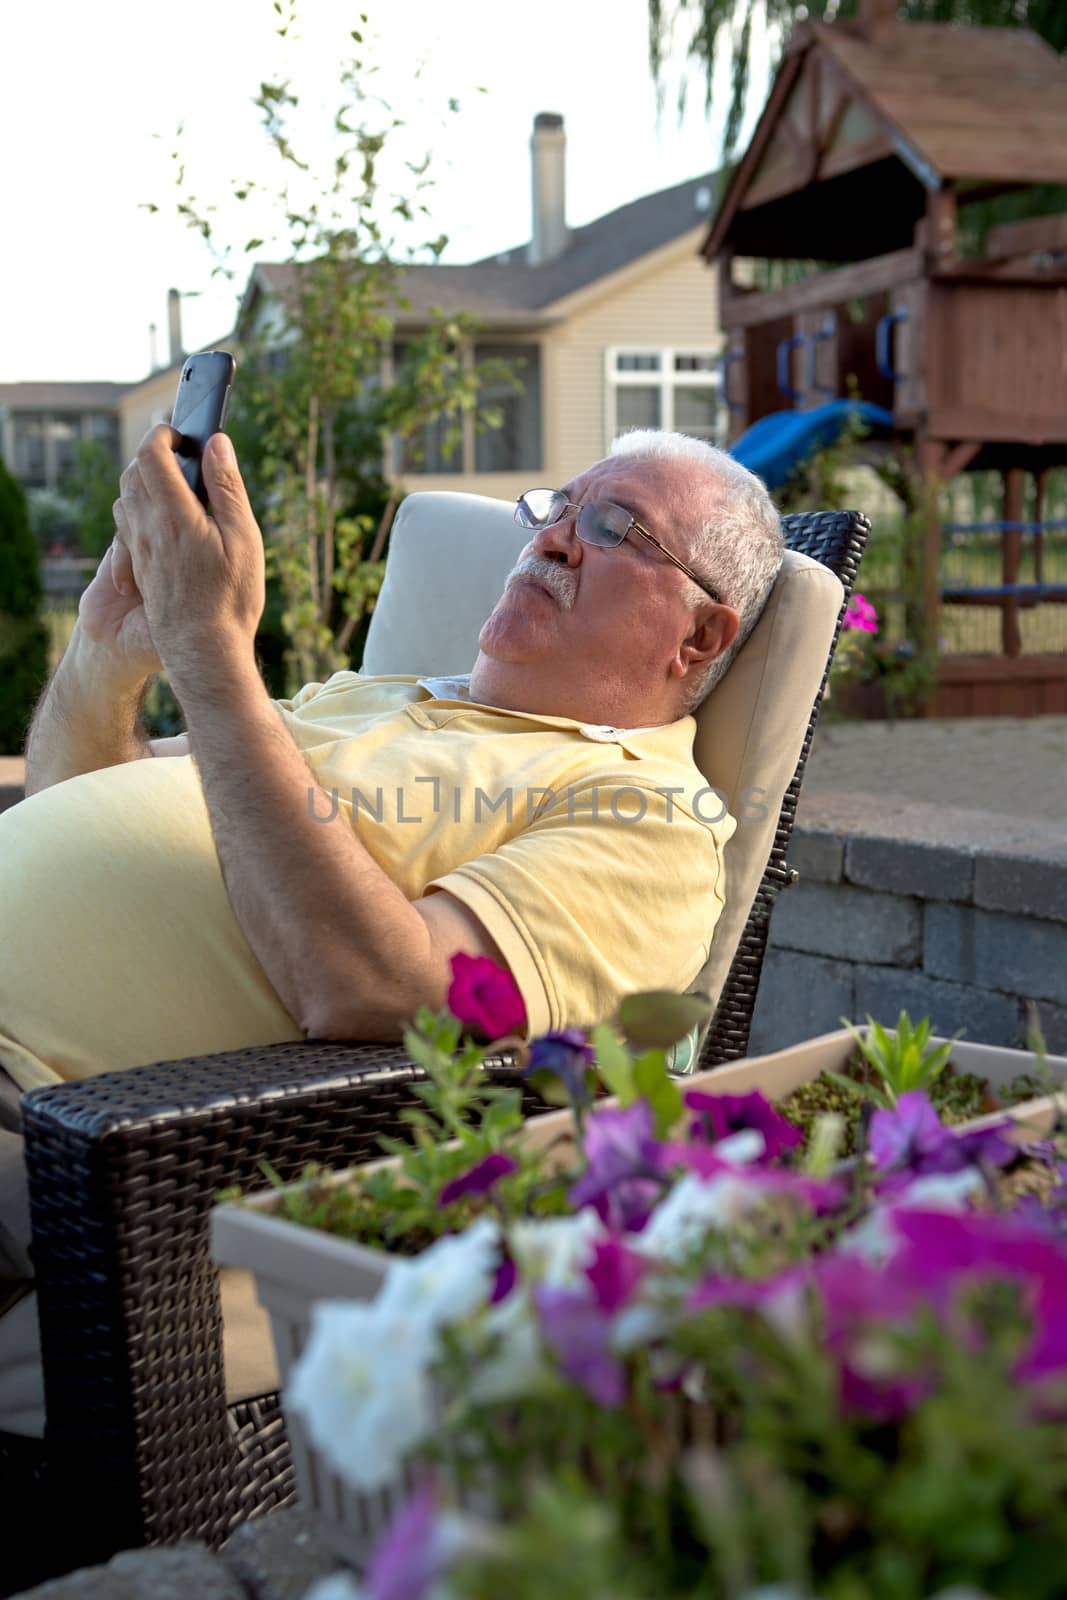 An old man using a cellular phone.